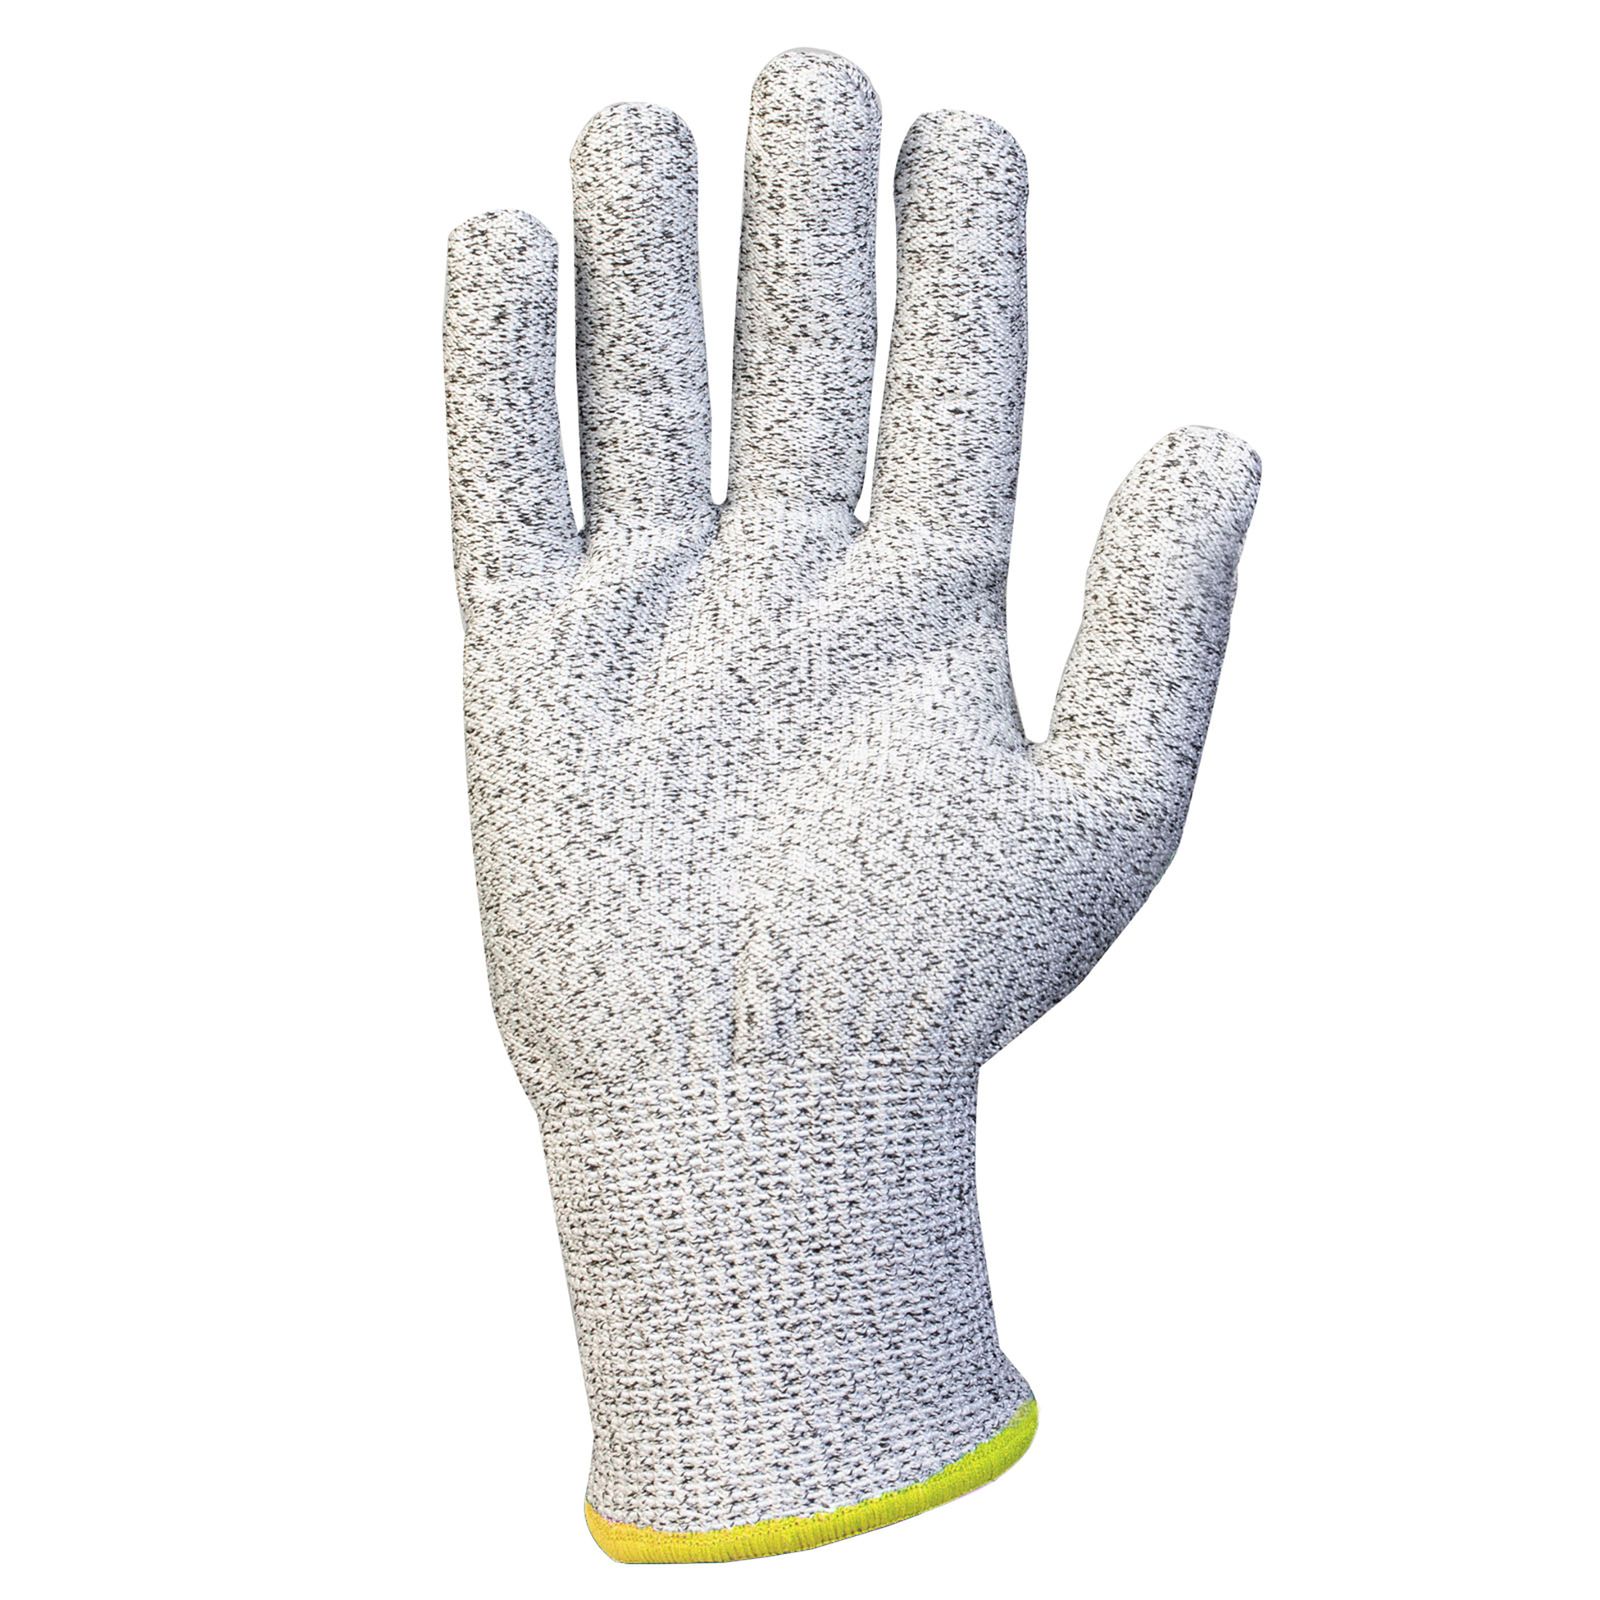 Palm of the JORESTECH safety multipurpose white gloves